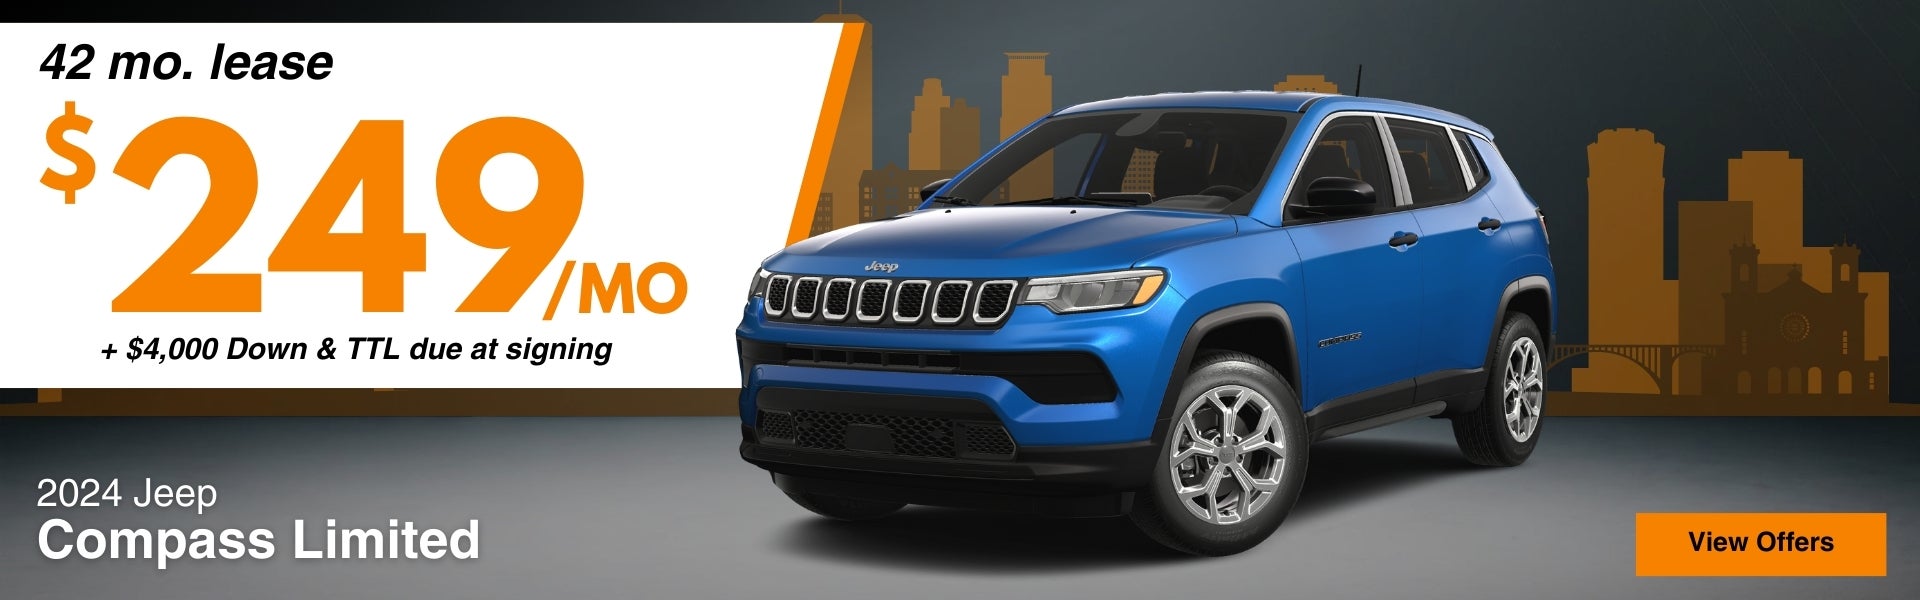 Jeep Compass Lease Offer